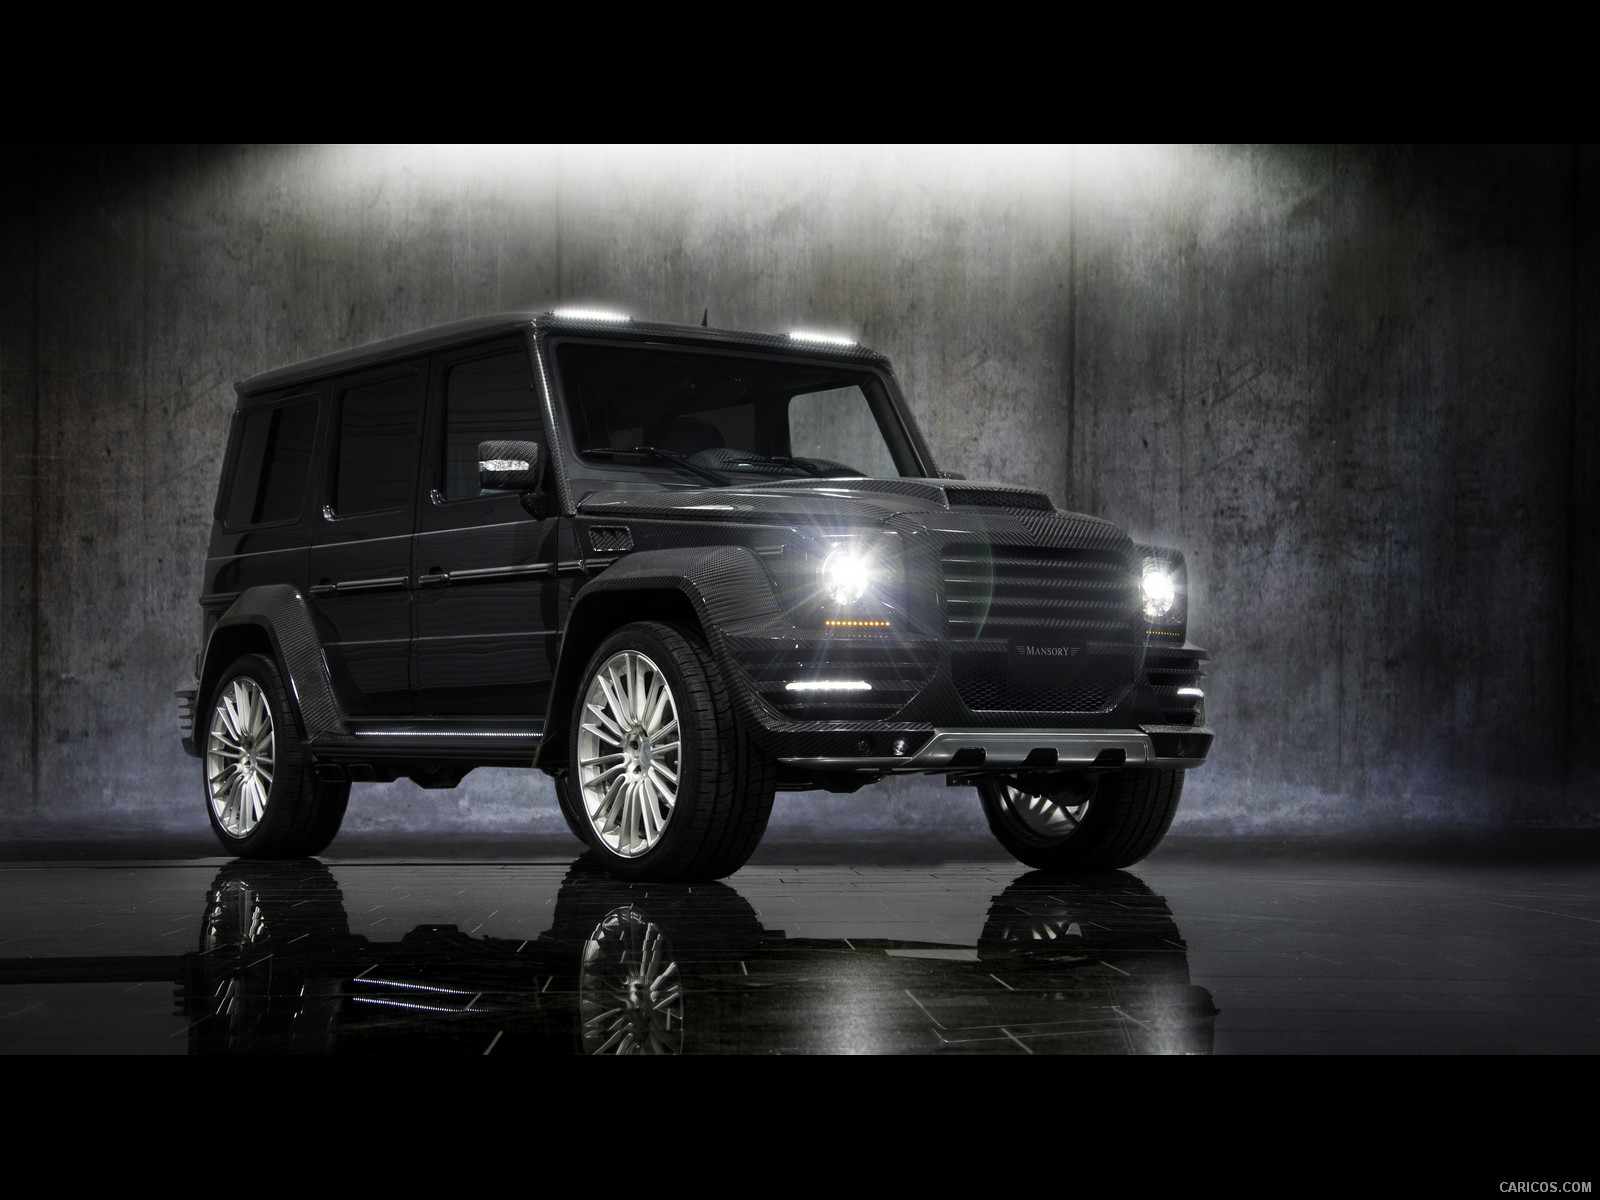 Mansory G-Couture based on Mercedes G-Class  - Front, #1 of 39